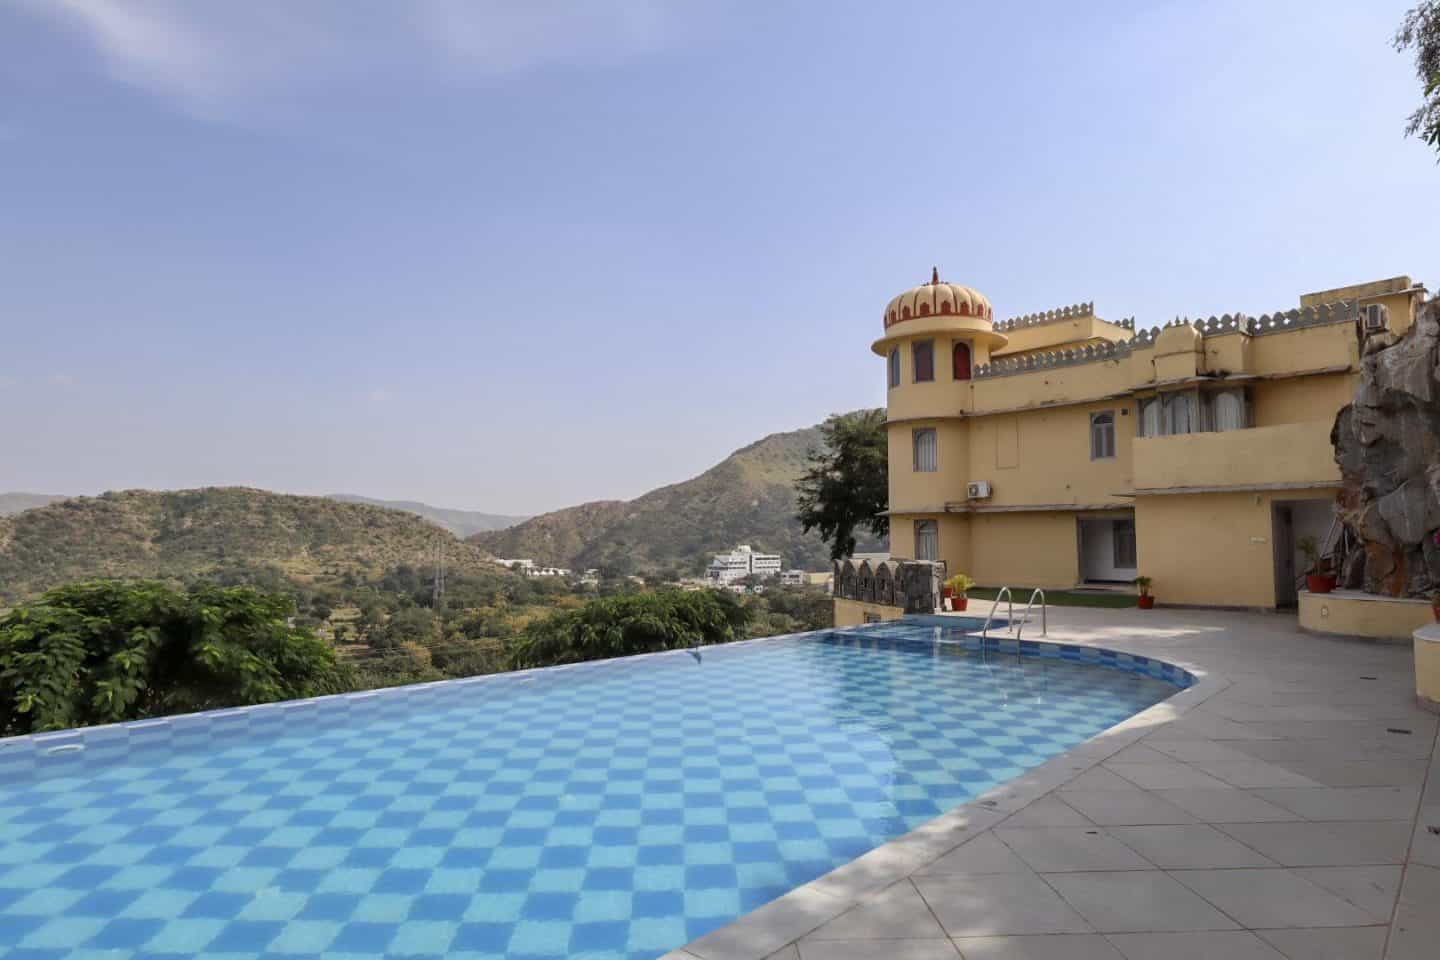 swimming pool and mountains at Shahpura Kumbhal | best places to visit in India